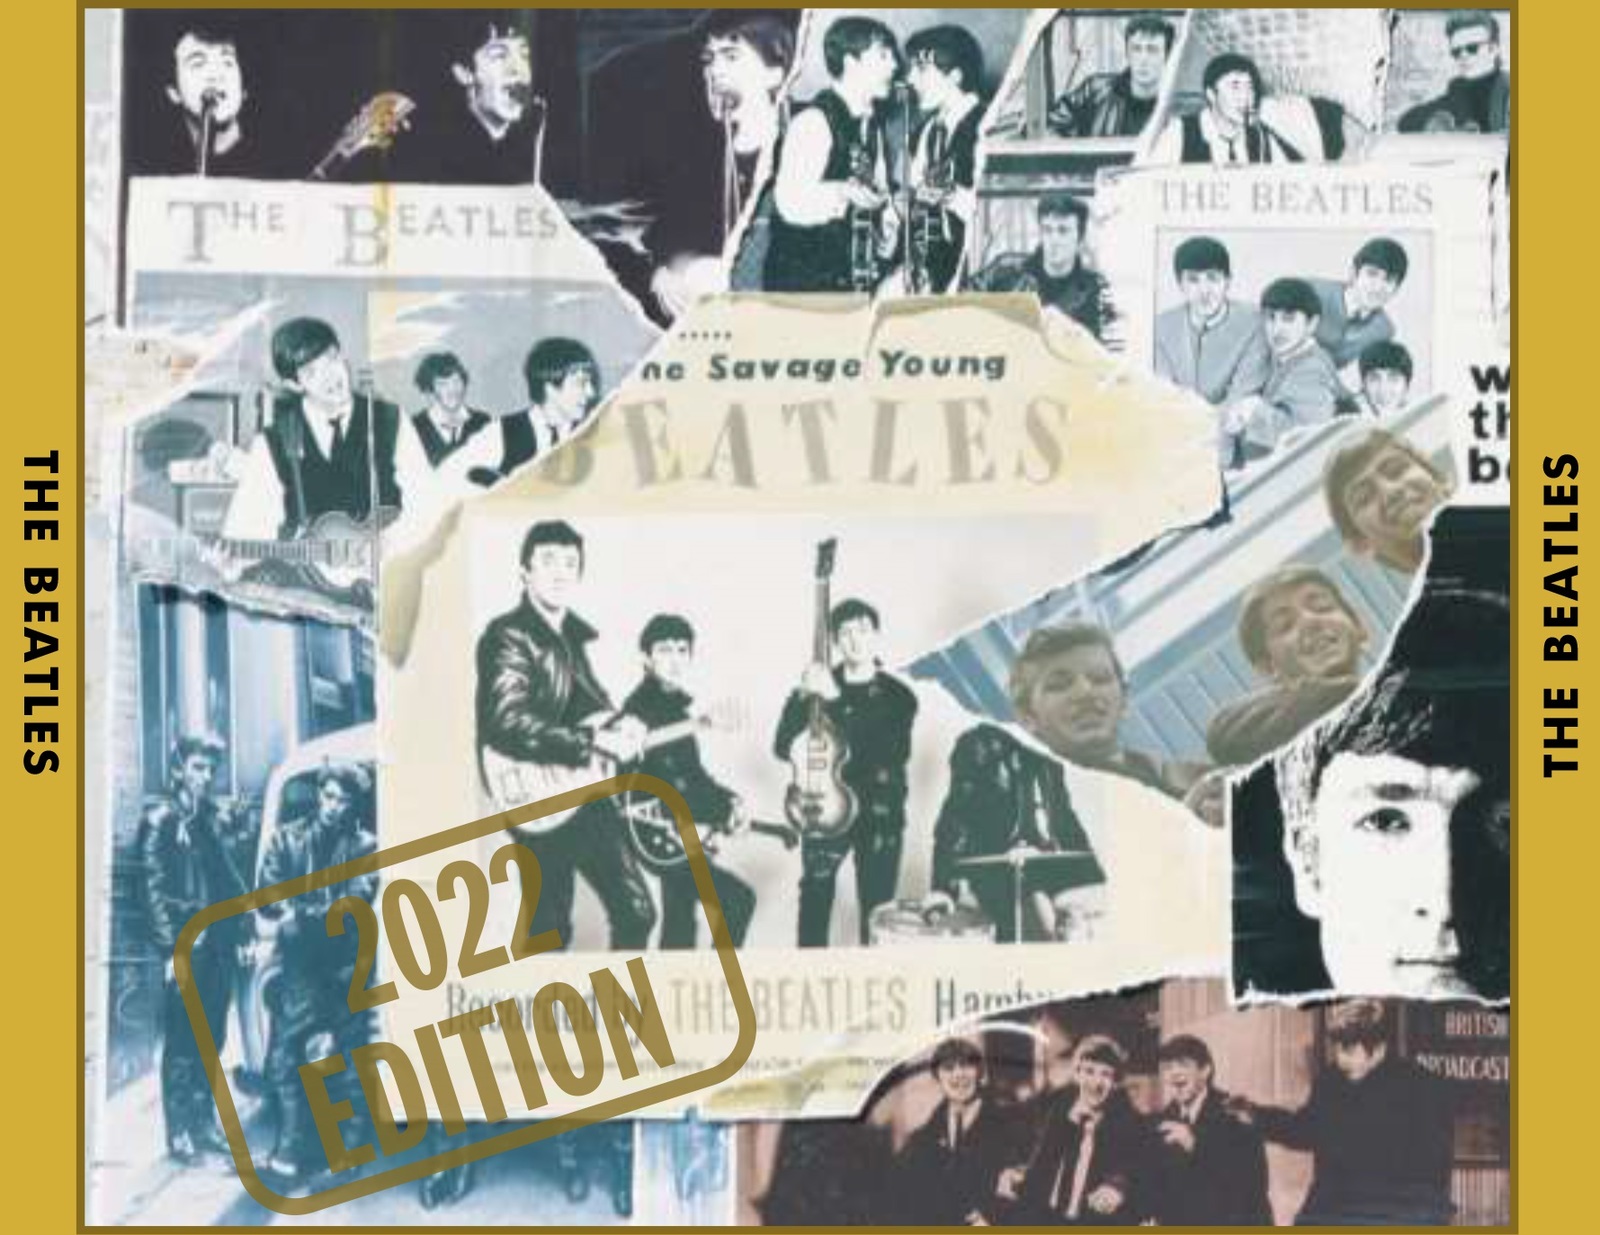 Primary image for The Beatles - Anthology Volume One (1)  [2022 Expanded Edition] 4-CD Set  Stereo